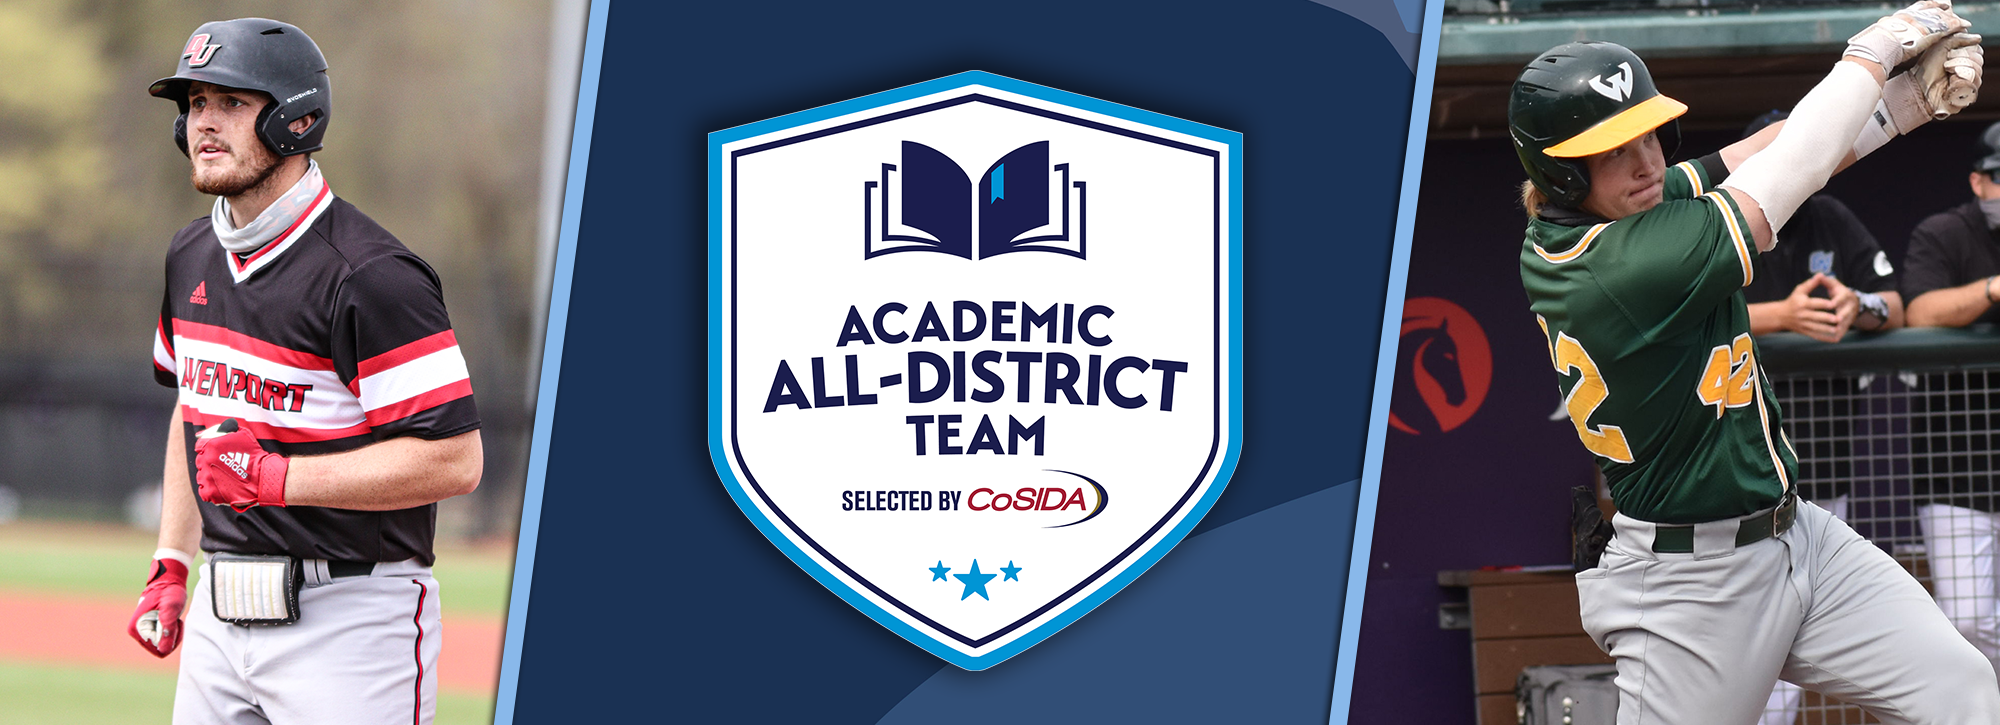 Davenport's Marcoux, Wayne State's MacLean Named CoSIDA Academic All-District Baseball Honorees